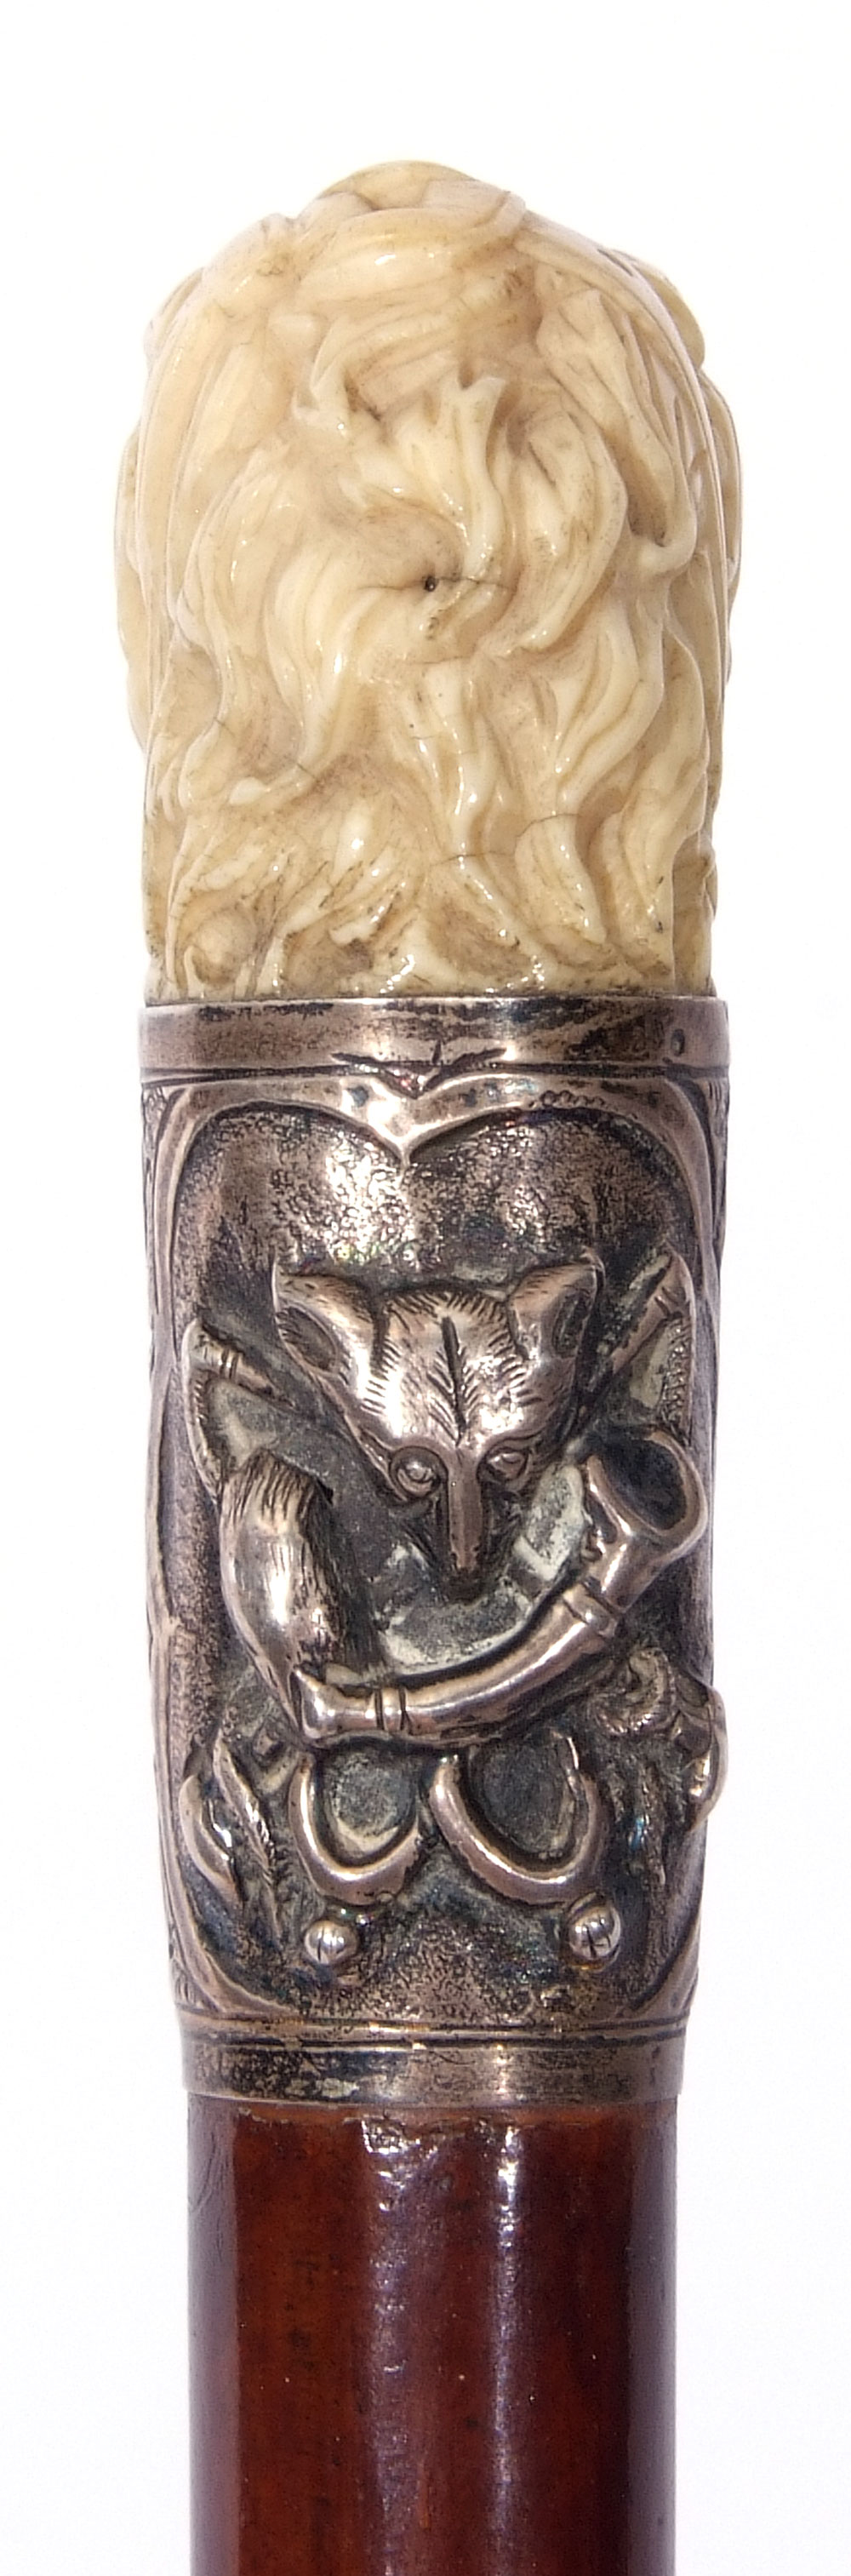 19th century hunting cane, the ivory handle carved in the form of a hound with glass or - Image 8 of 8